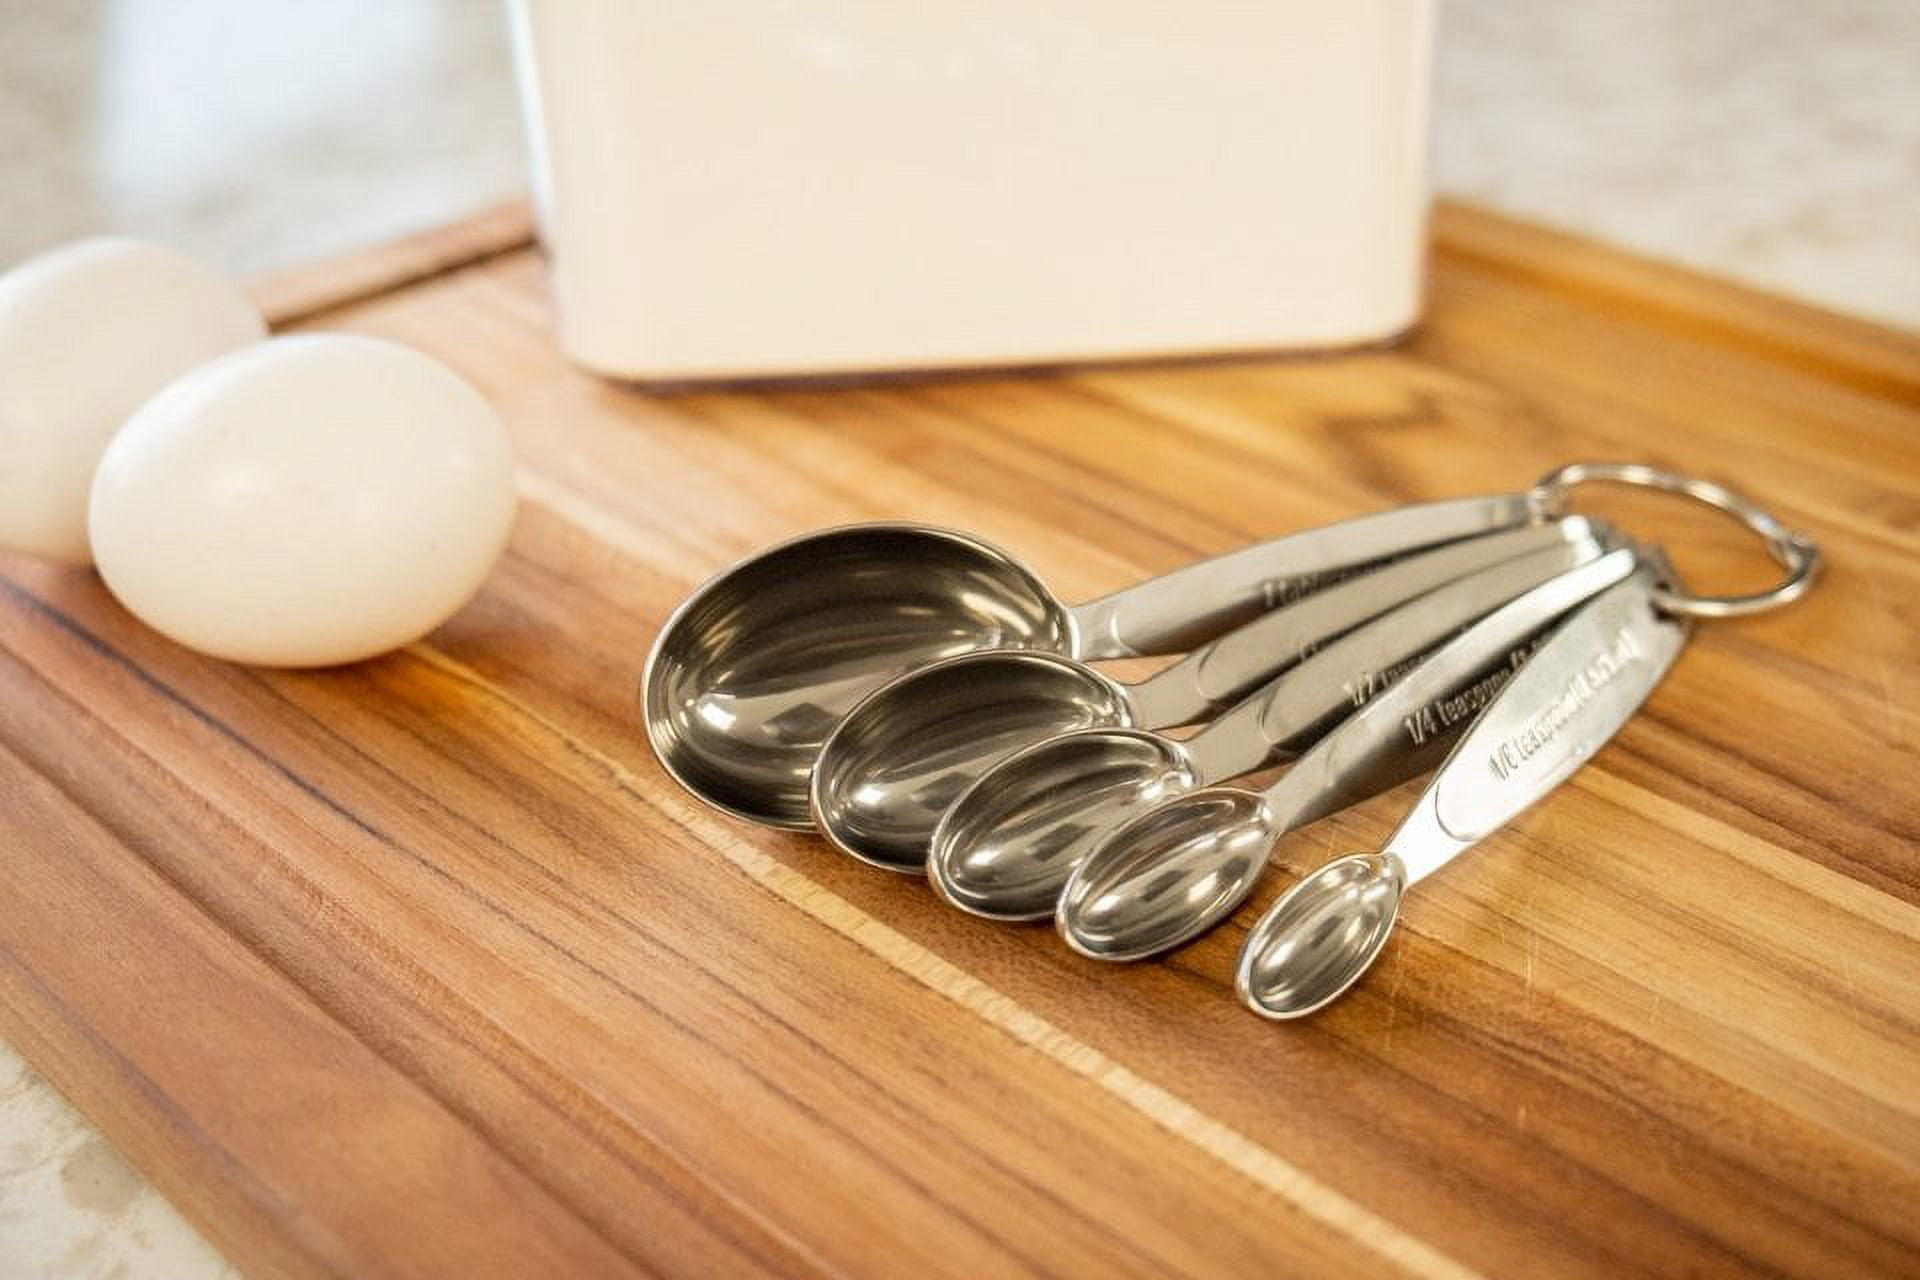 Cuisipro Stainless Steel Measuring Spoon Set, 5 Piece : Target